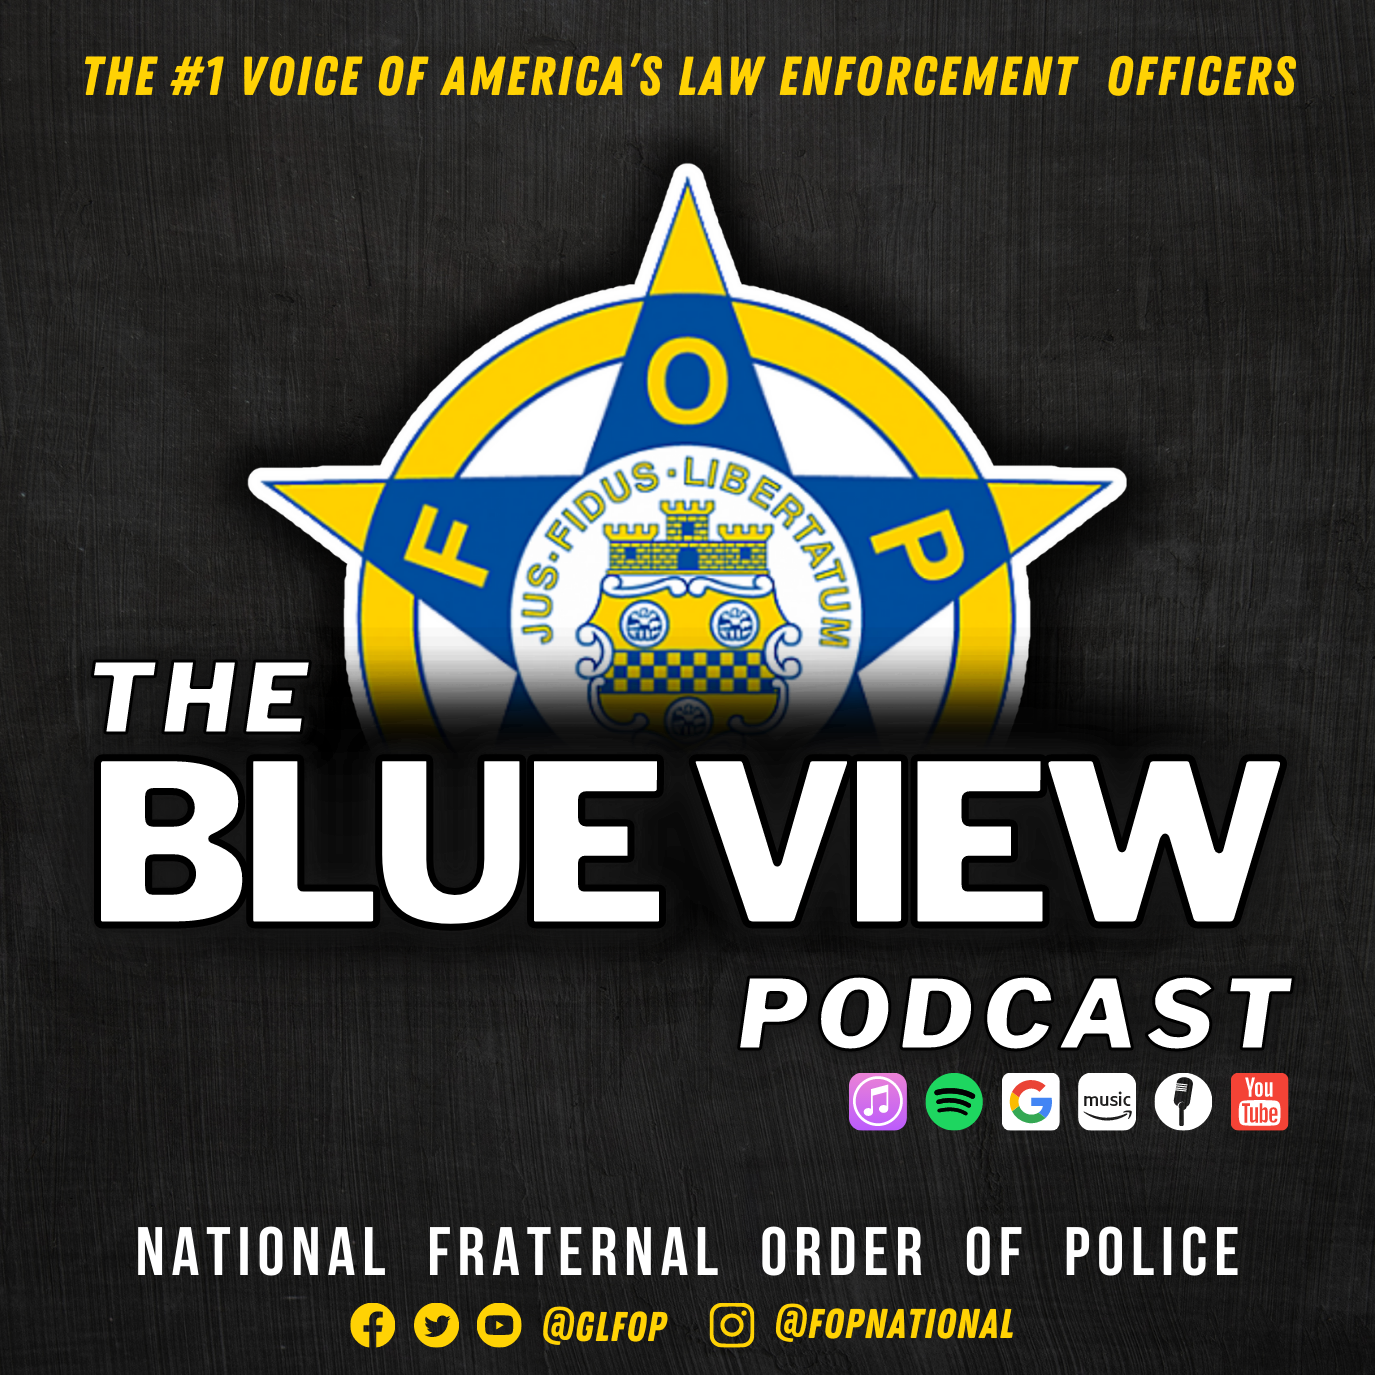 Recording the Police: Video Doesn't Always Tell the Truth About Police Actions with Lance LoRusso